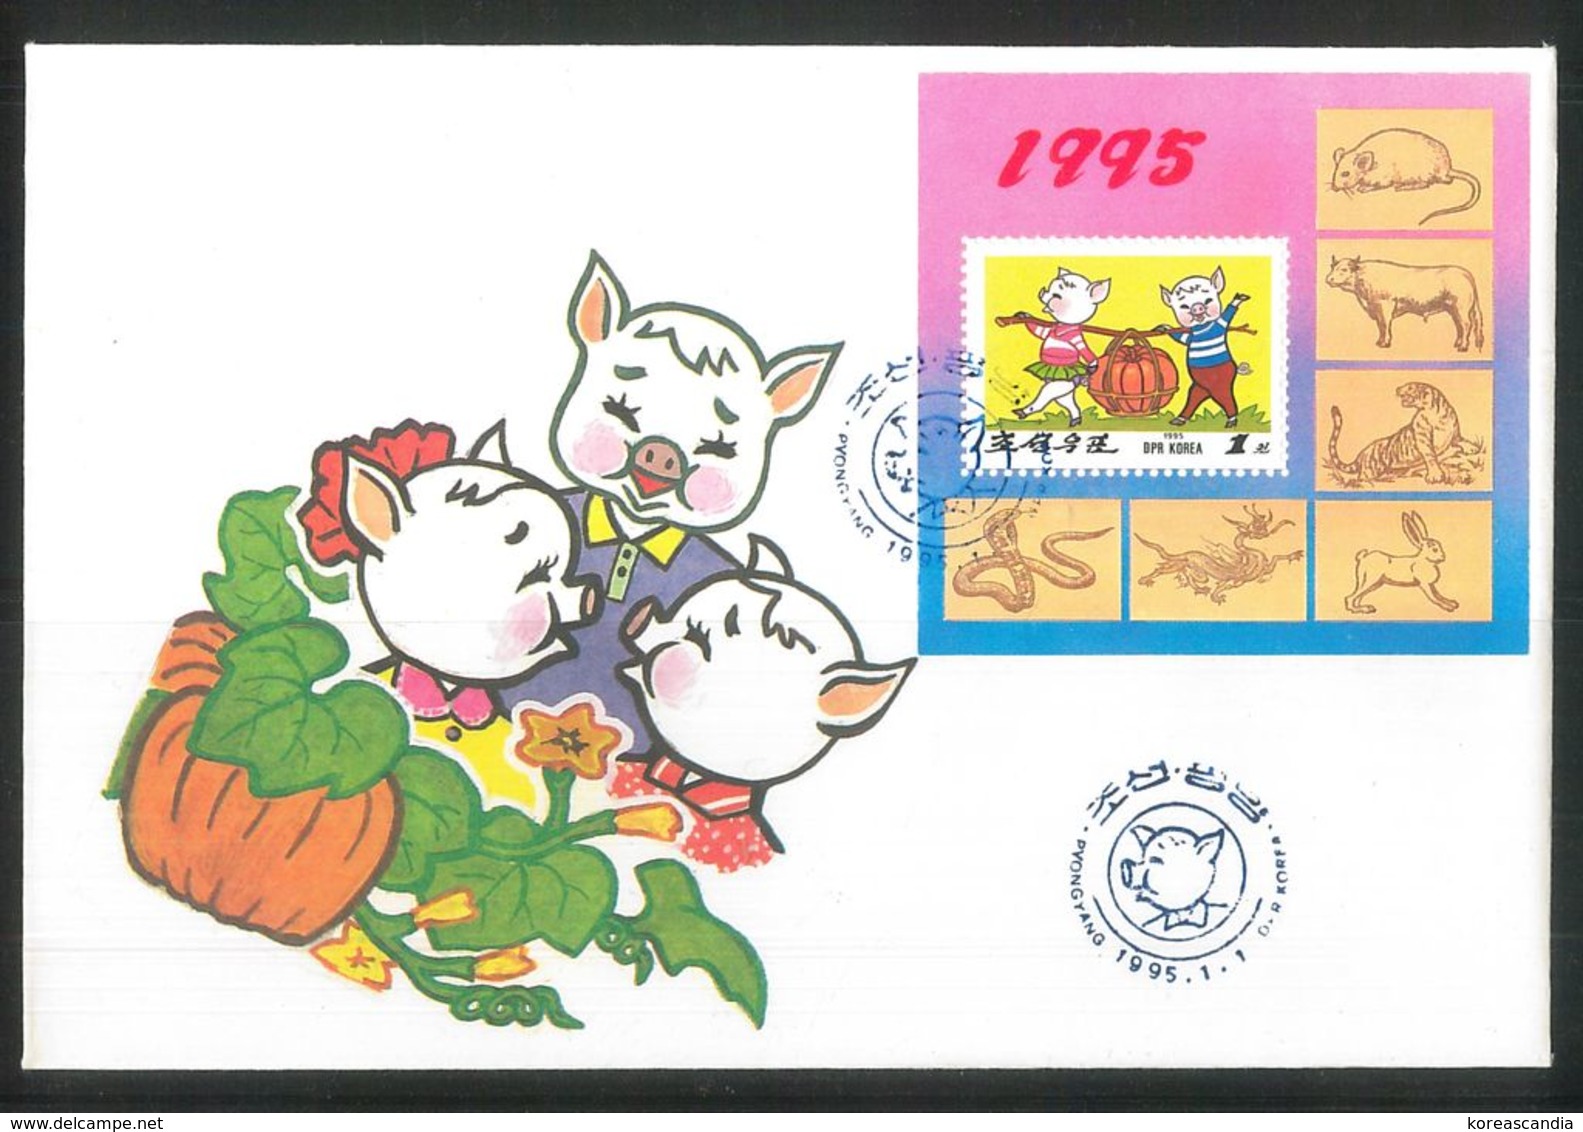 NORTH KOREA 1995 NEW YEAR OF THE PIG JUCHE 84 SHEETLET (II) FDC - New Year